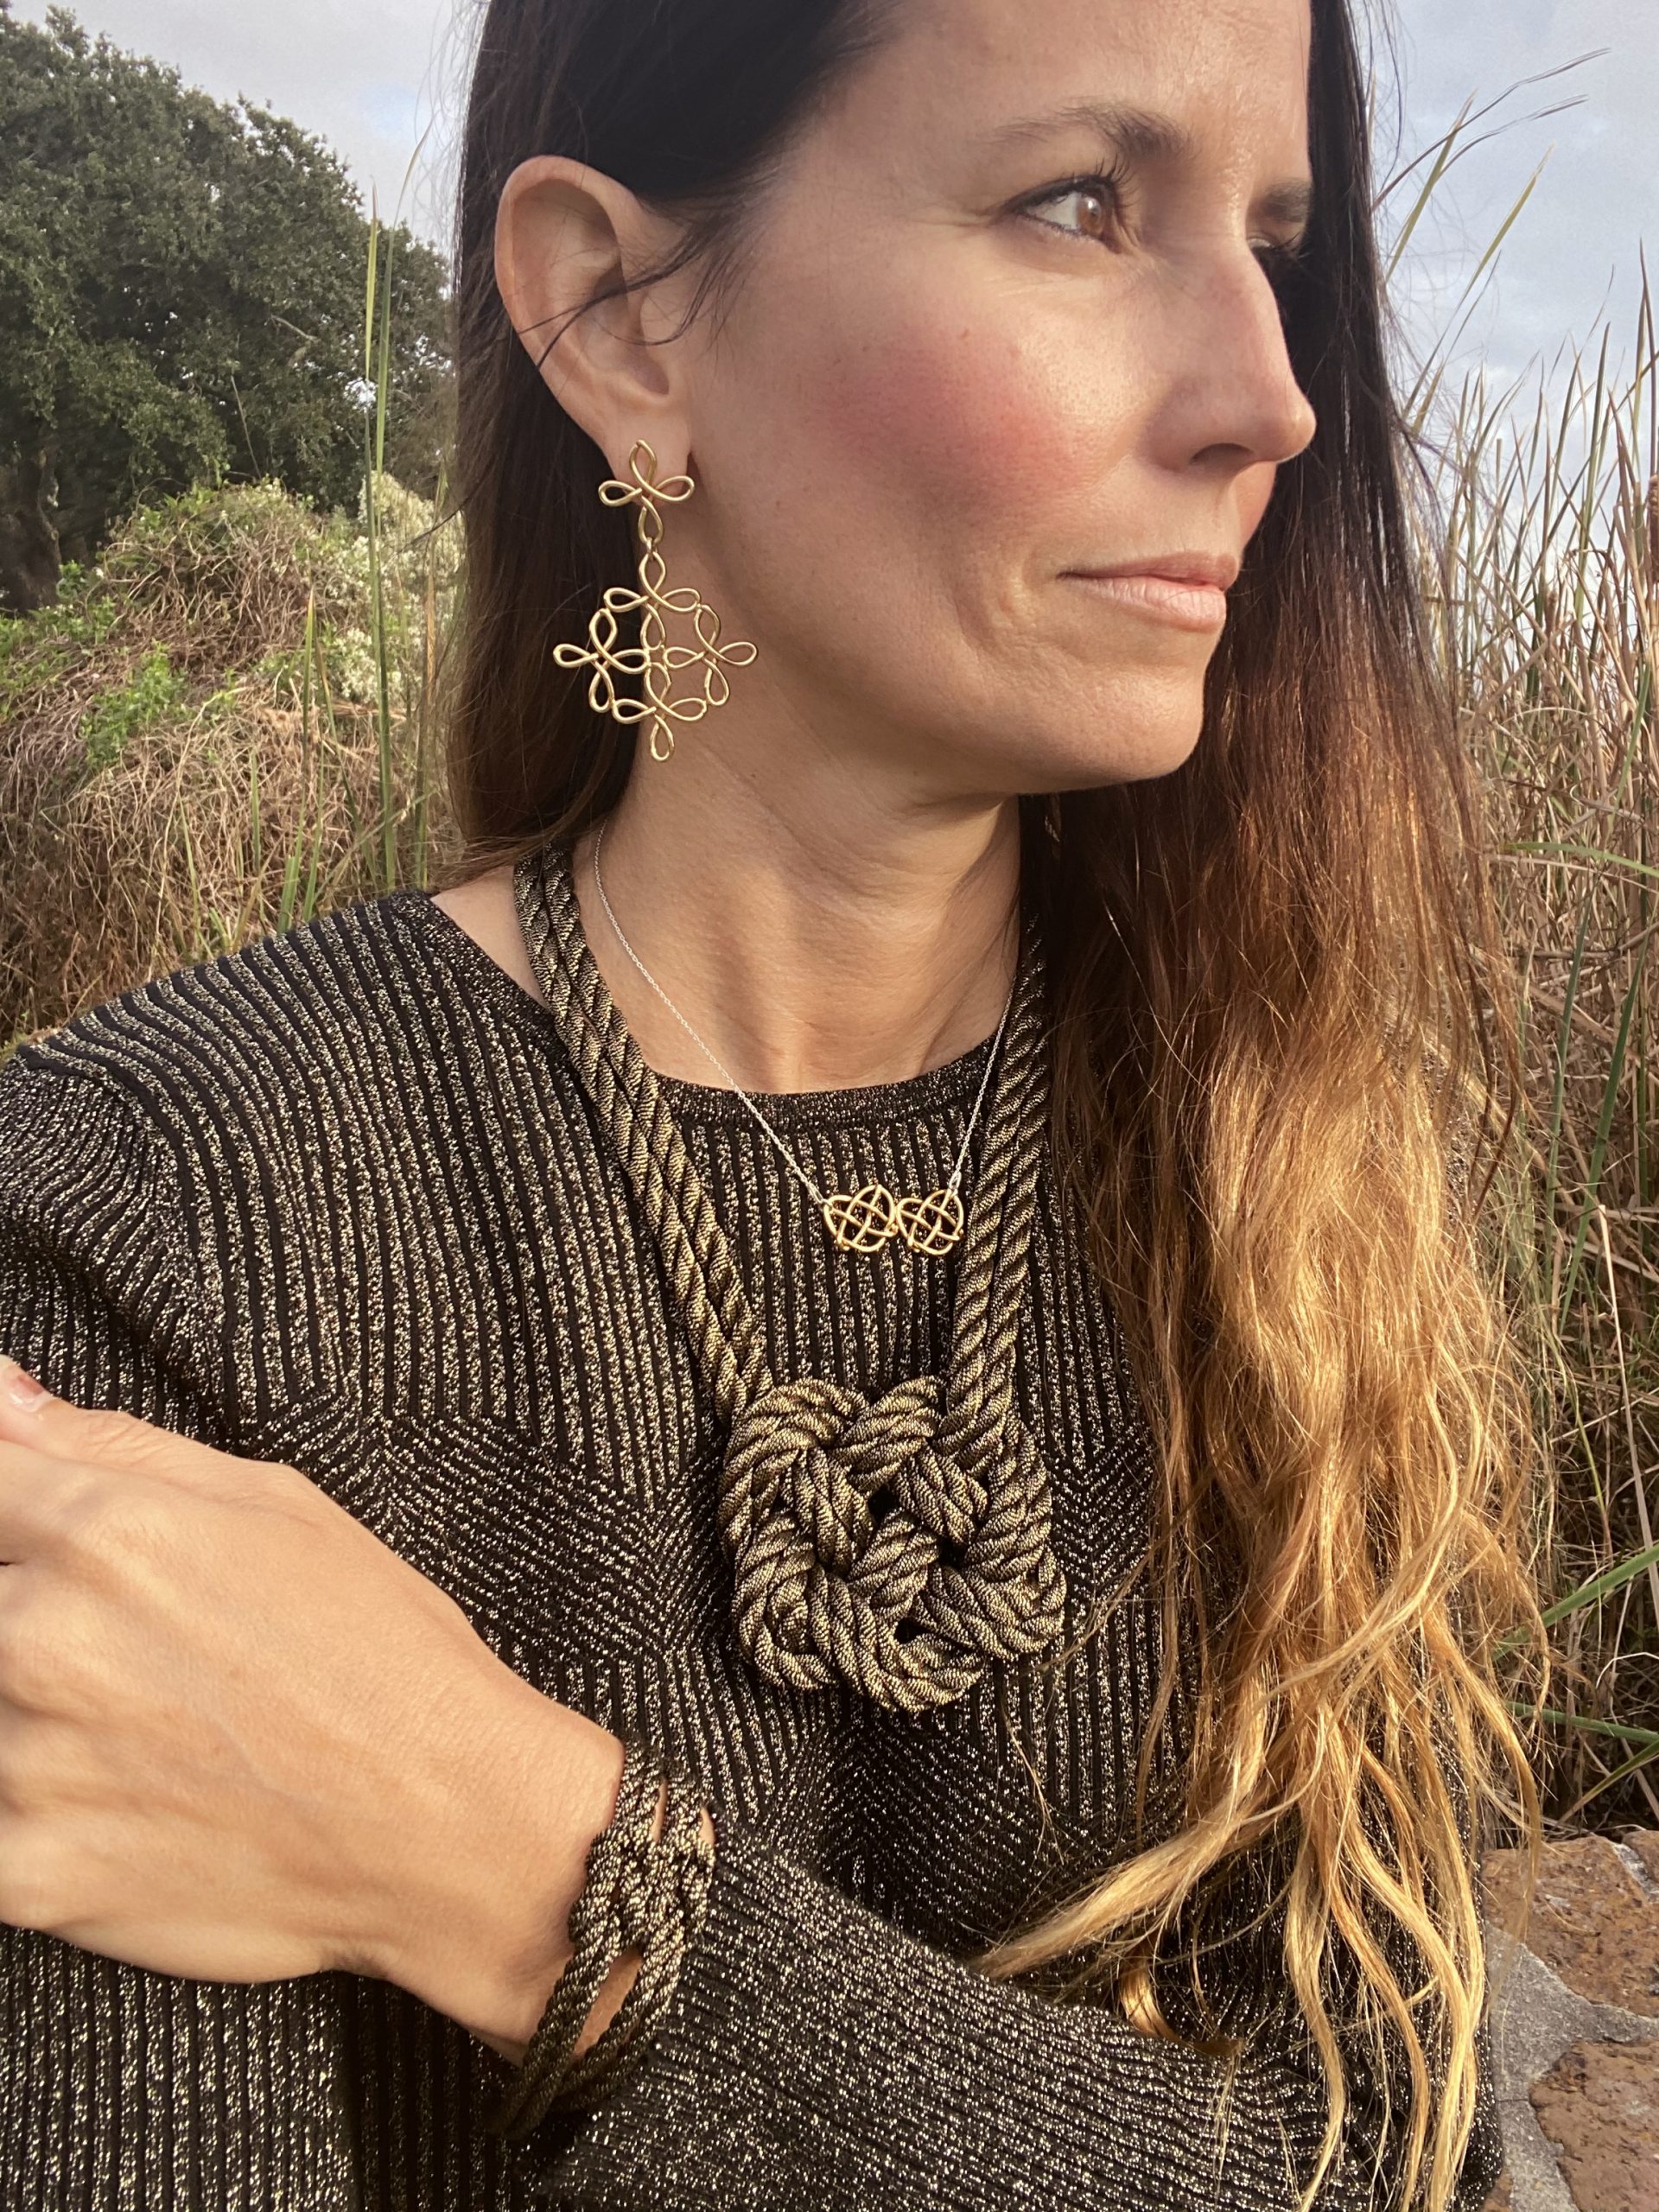 Inspired by a knot seen in The Ashley Book of Knots, Mary Kent Hearon began experimenting with rope to make jewelry. She eventually created her signature piece of jewelry, The Heart Knot, also the name of her business. Her necklace is The Double Heart Knot in Black & Gold. 